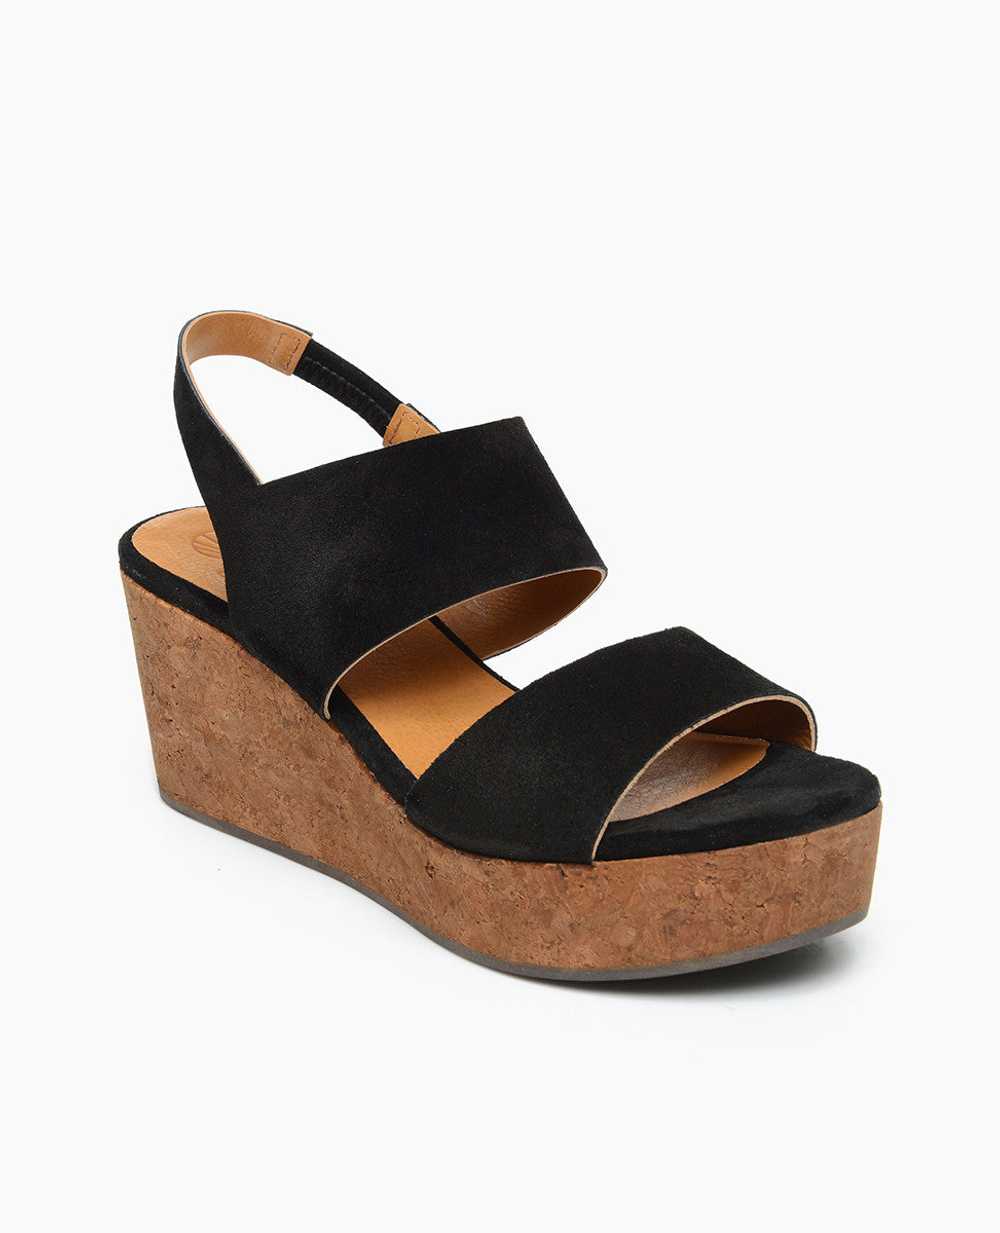 Coclico Glassy Wedge - Black Suede - image 3